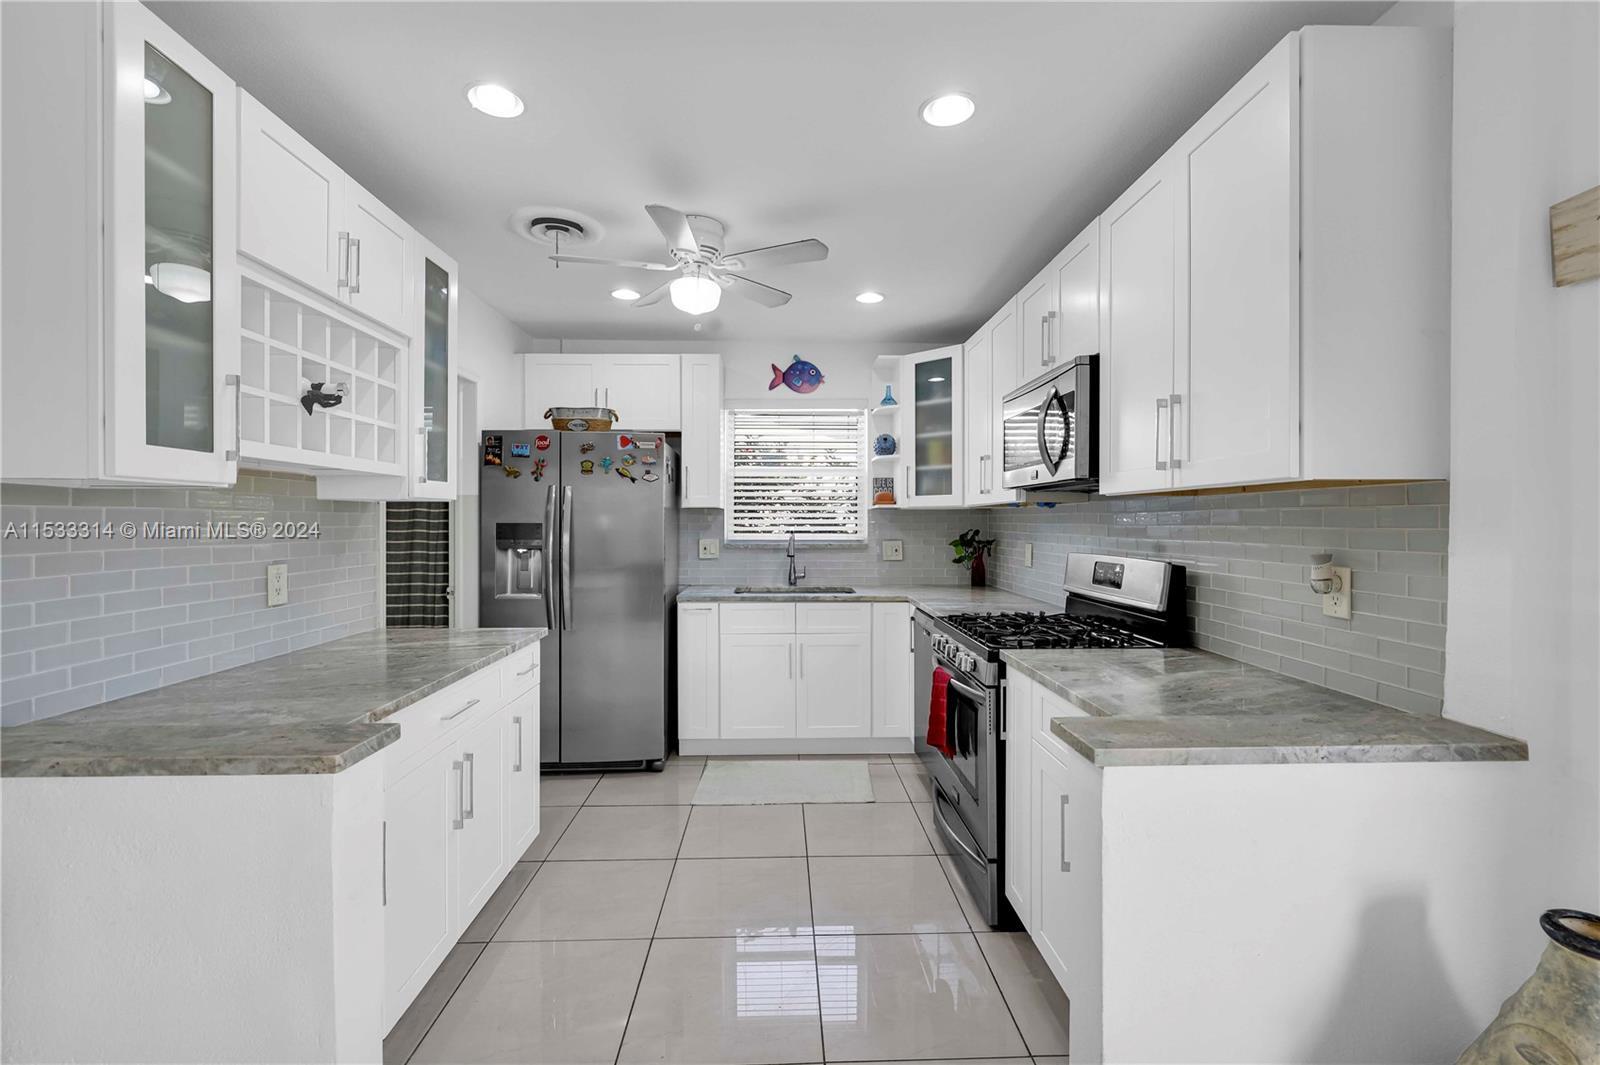 Beautiful 2/1 single family home with pool and deck in a great area of Hollywood Florida, with 8ft f